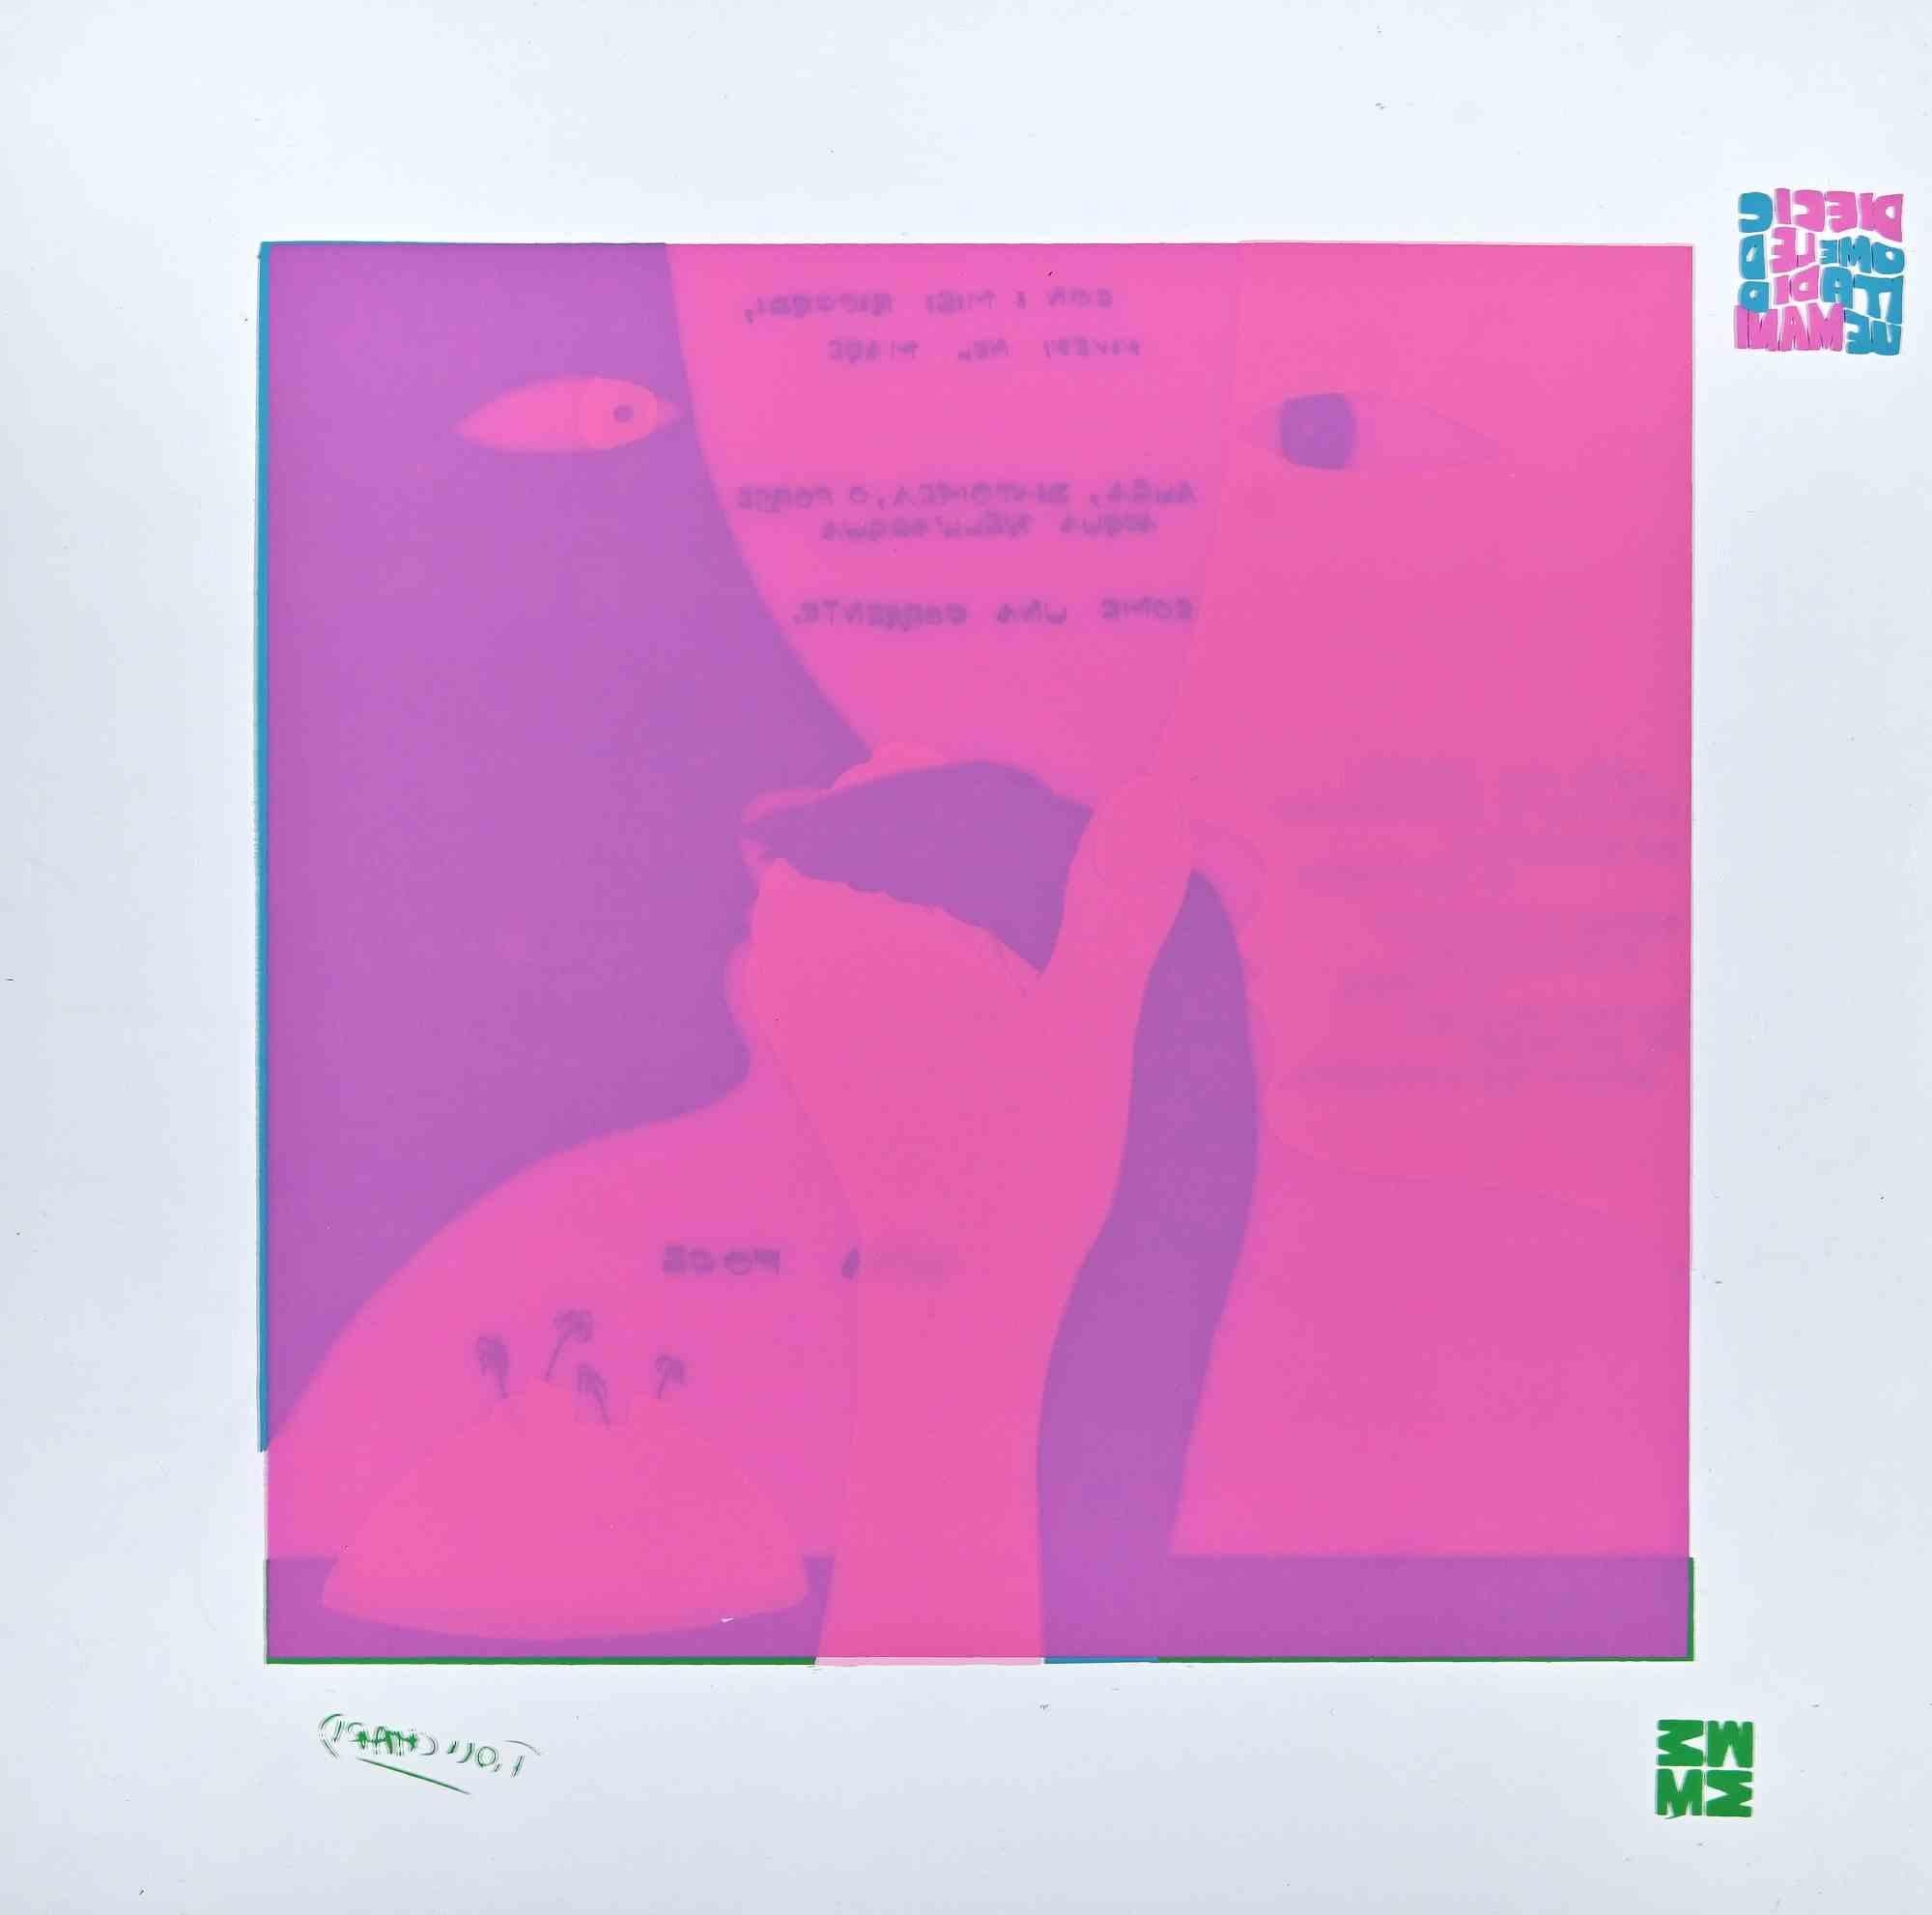 Una Foce - Diecicomeleditadid - Screen Print on Acetate by Ennio Pouchard - 1973 For Sale 1